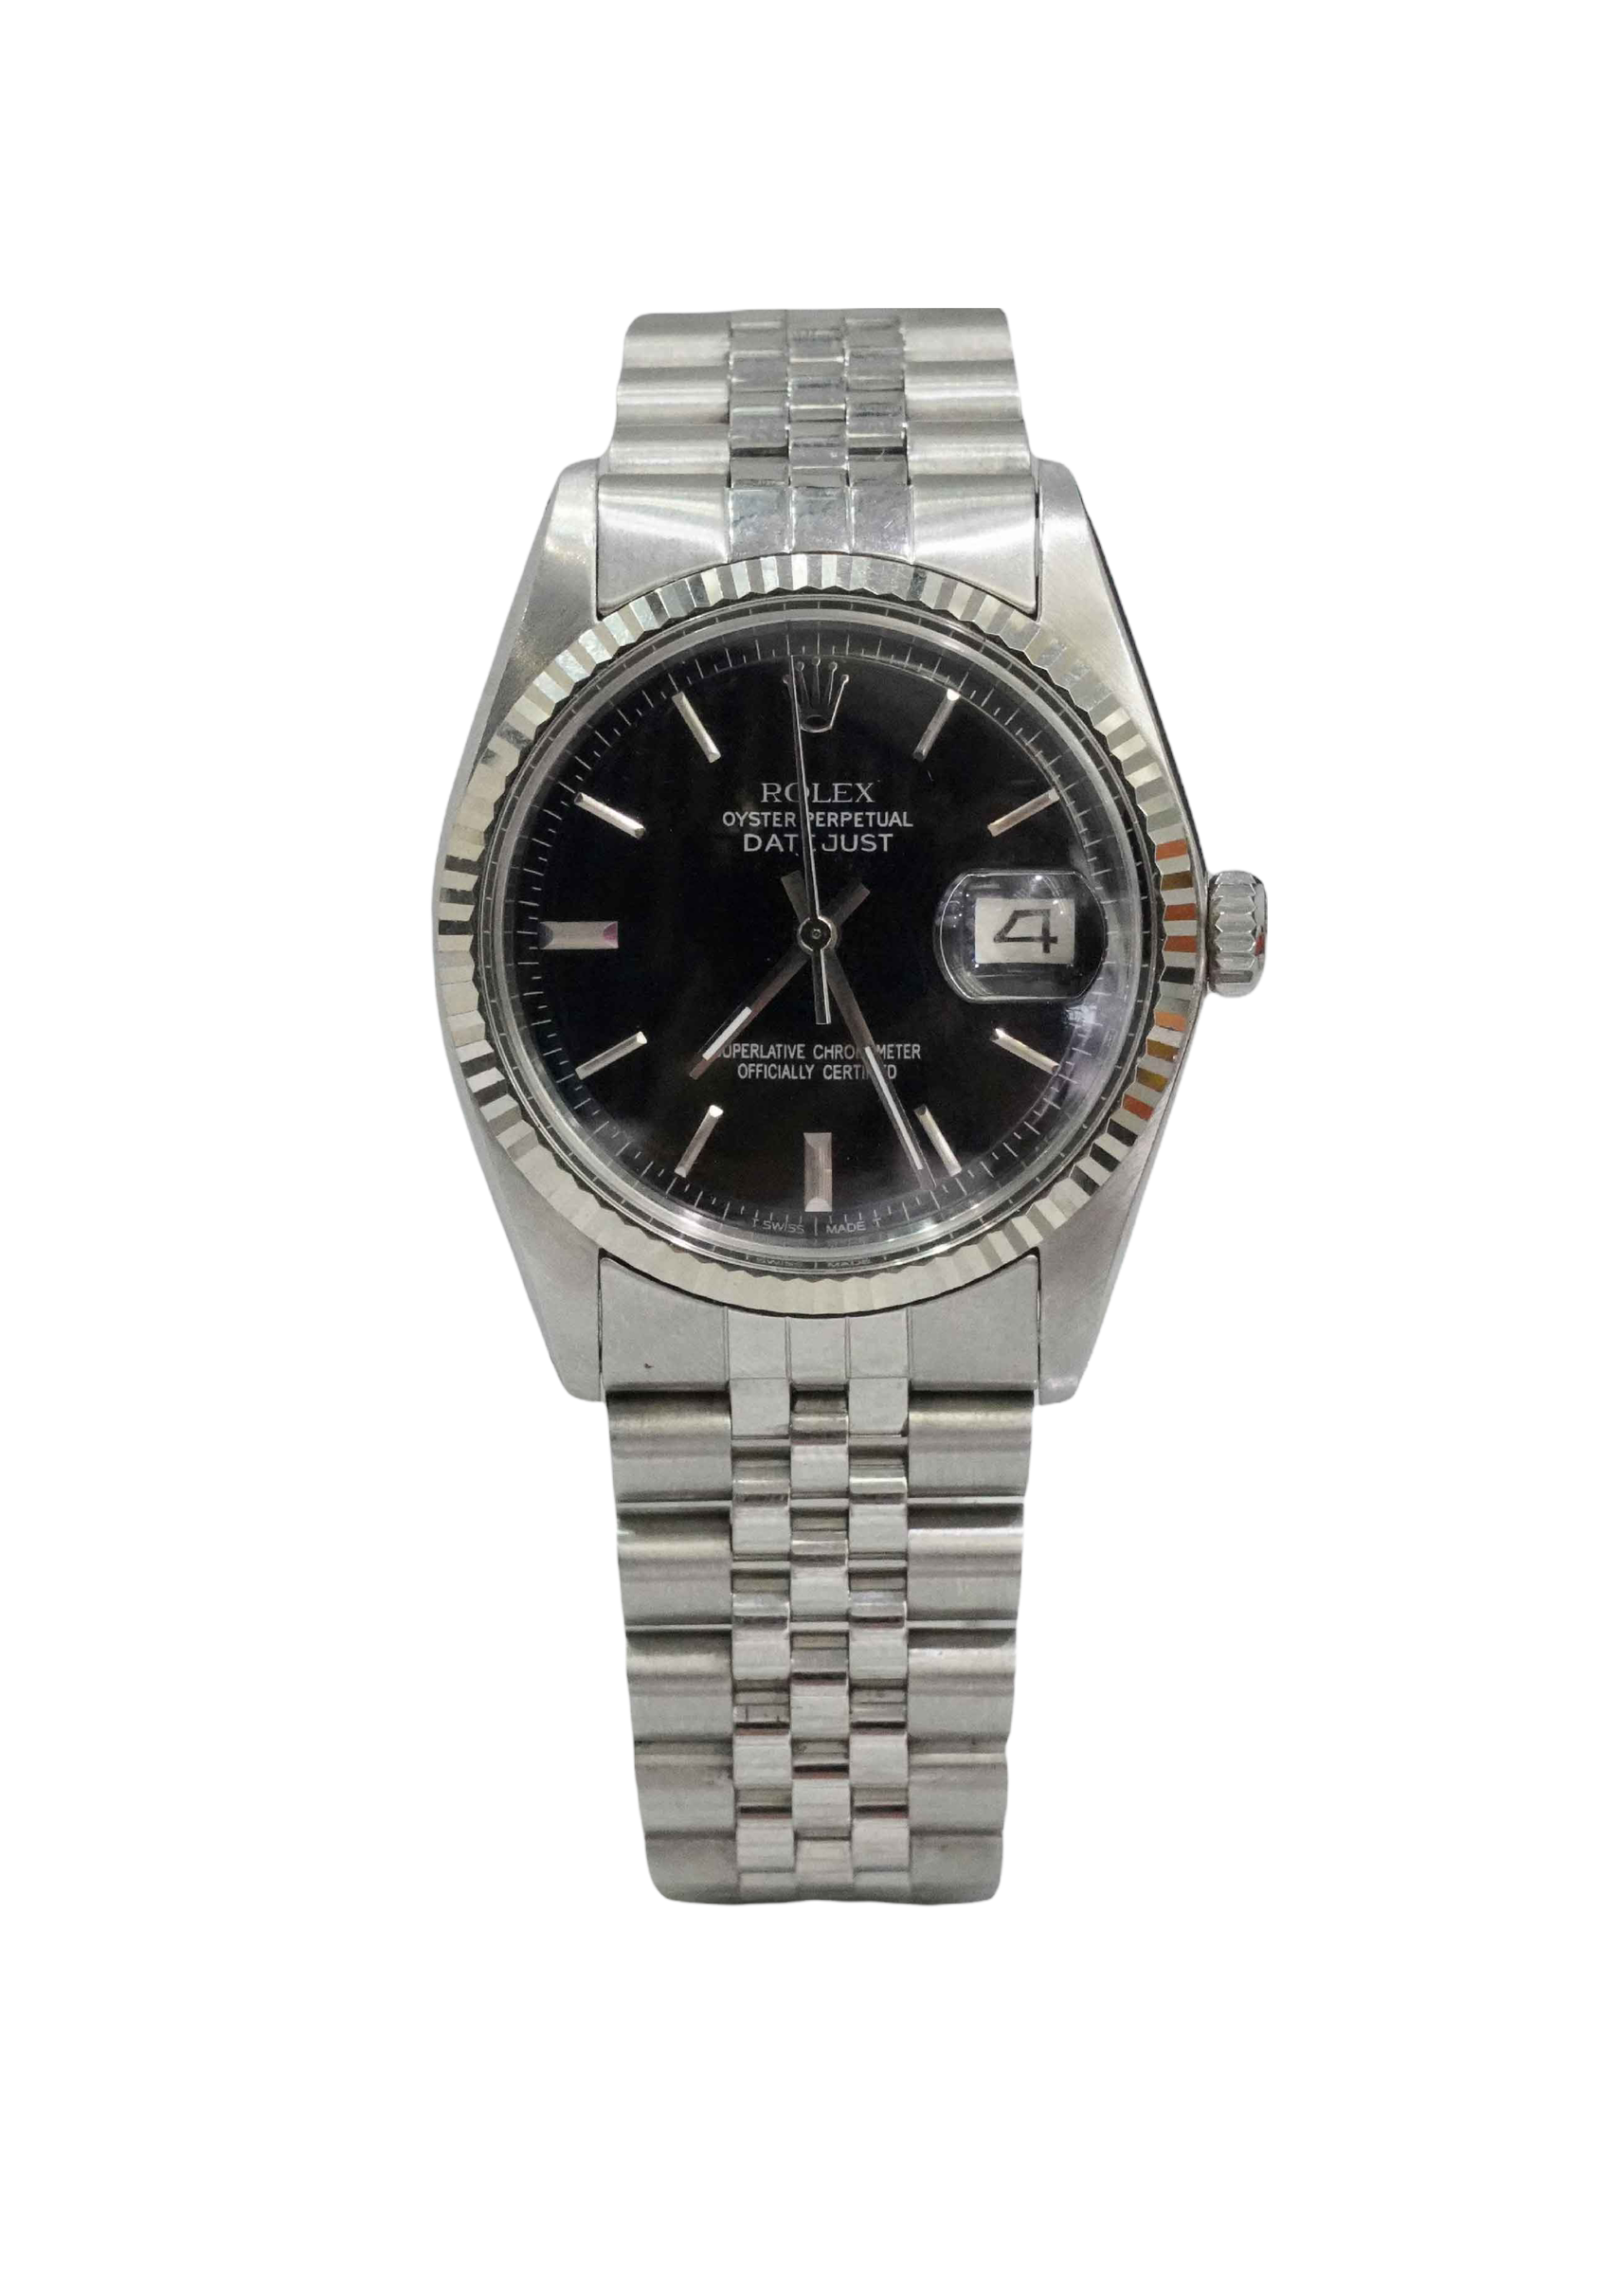 Rolex Date Just 36mm Stainless Steel Ref: 1601